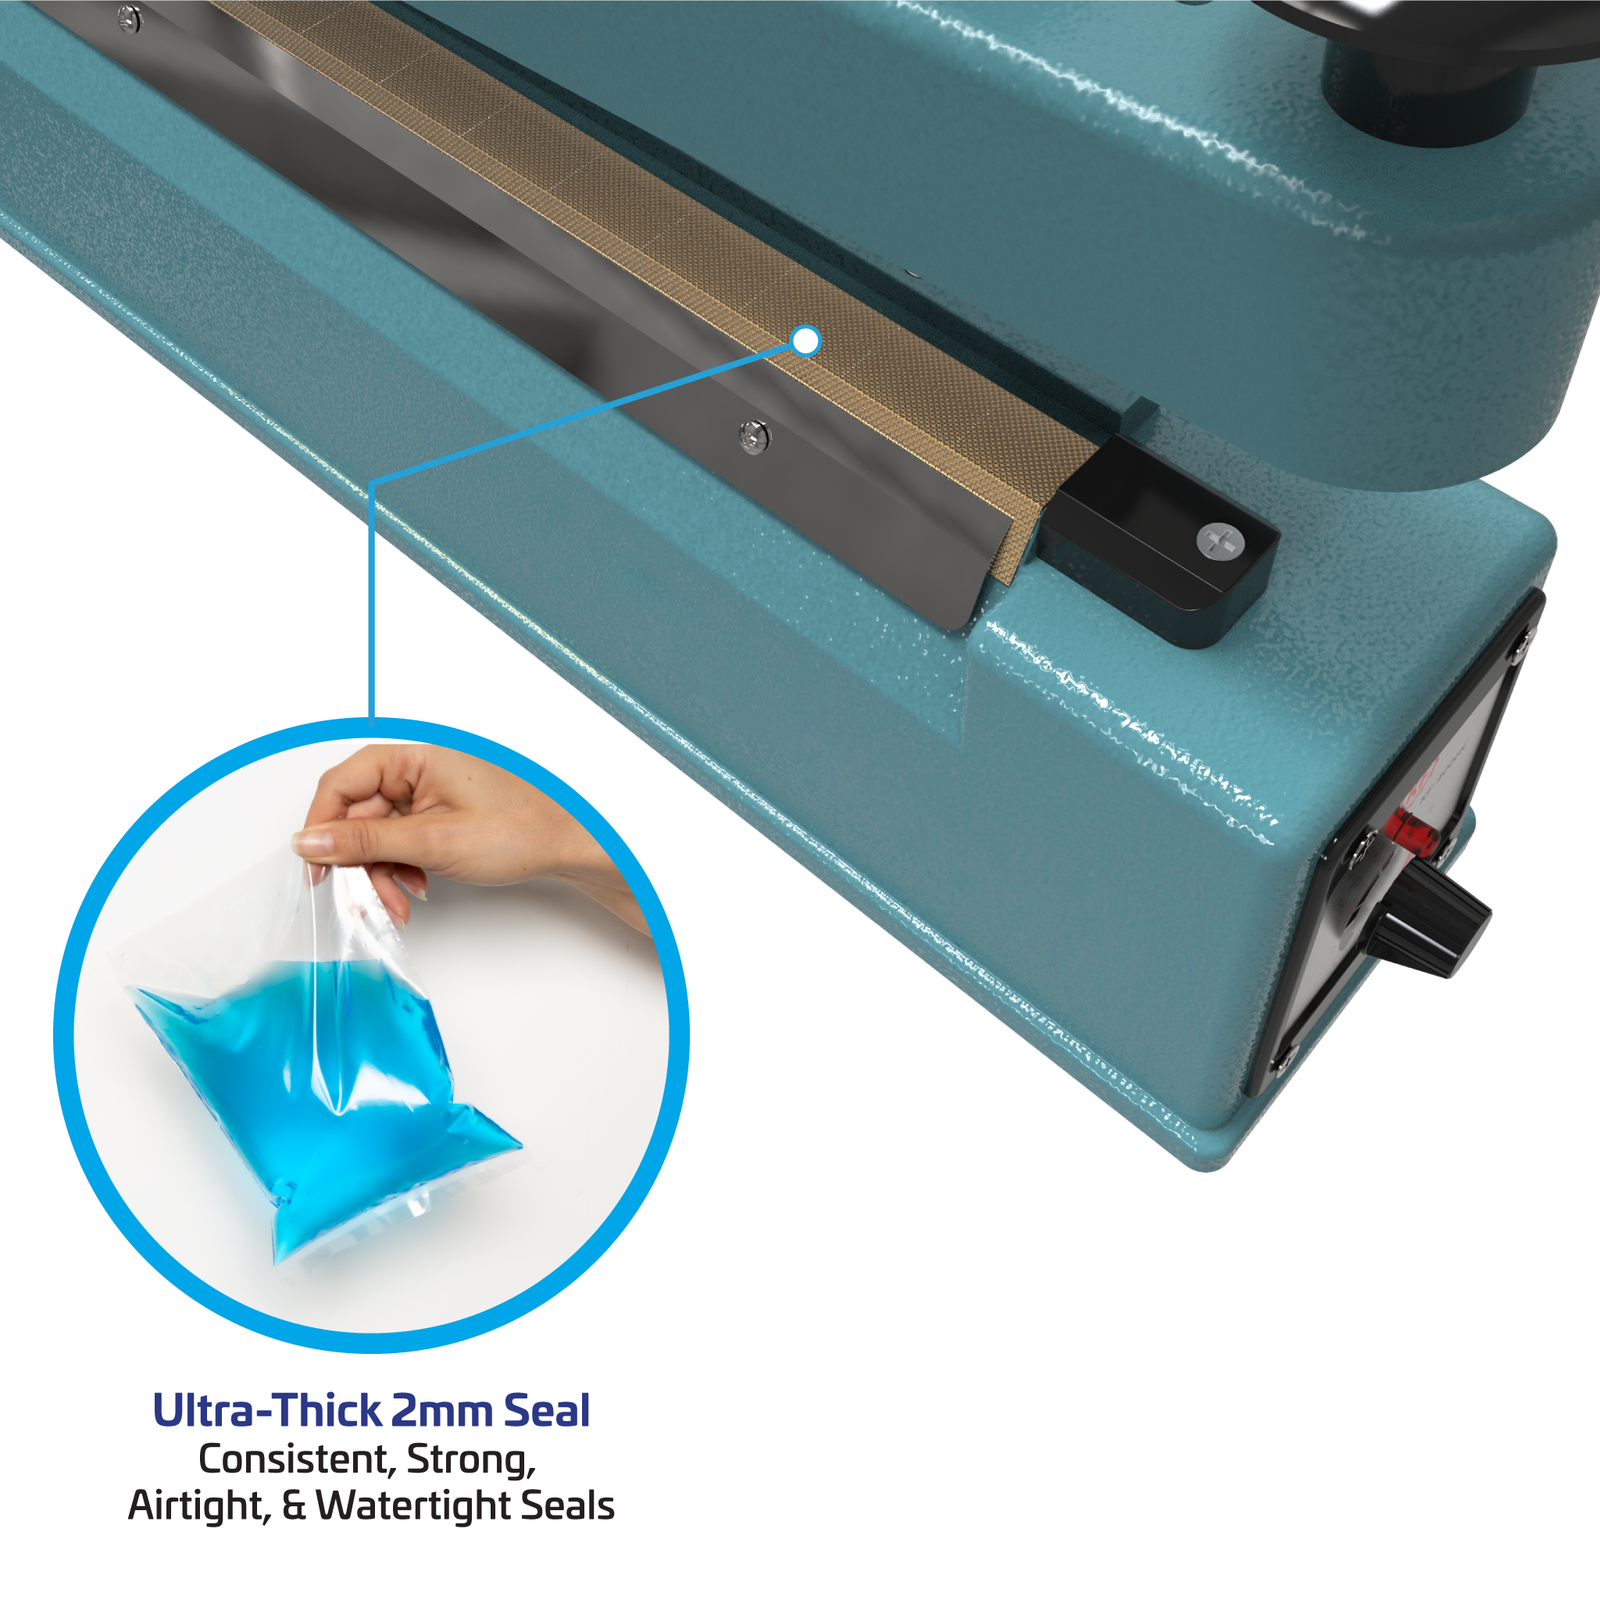 16 Inch manual impulse sealer with cutter. Zoomed in showing the sealing element. Feature reads 